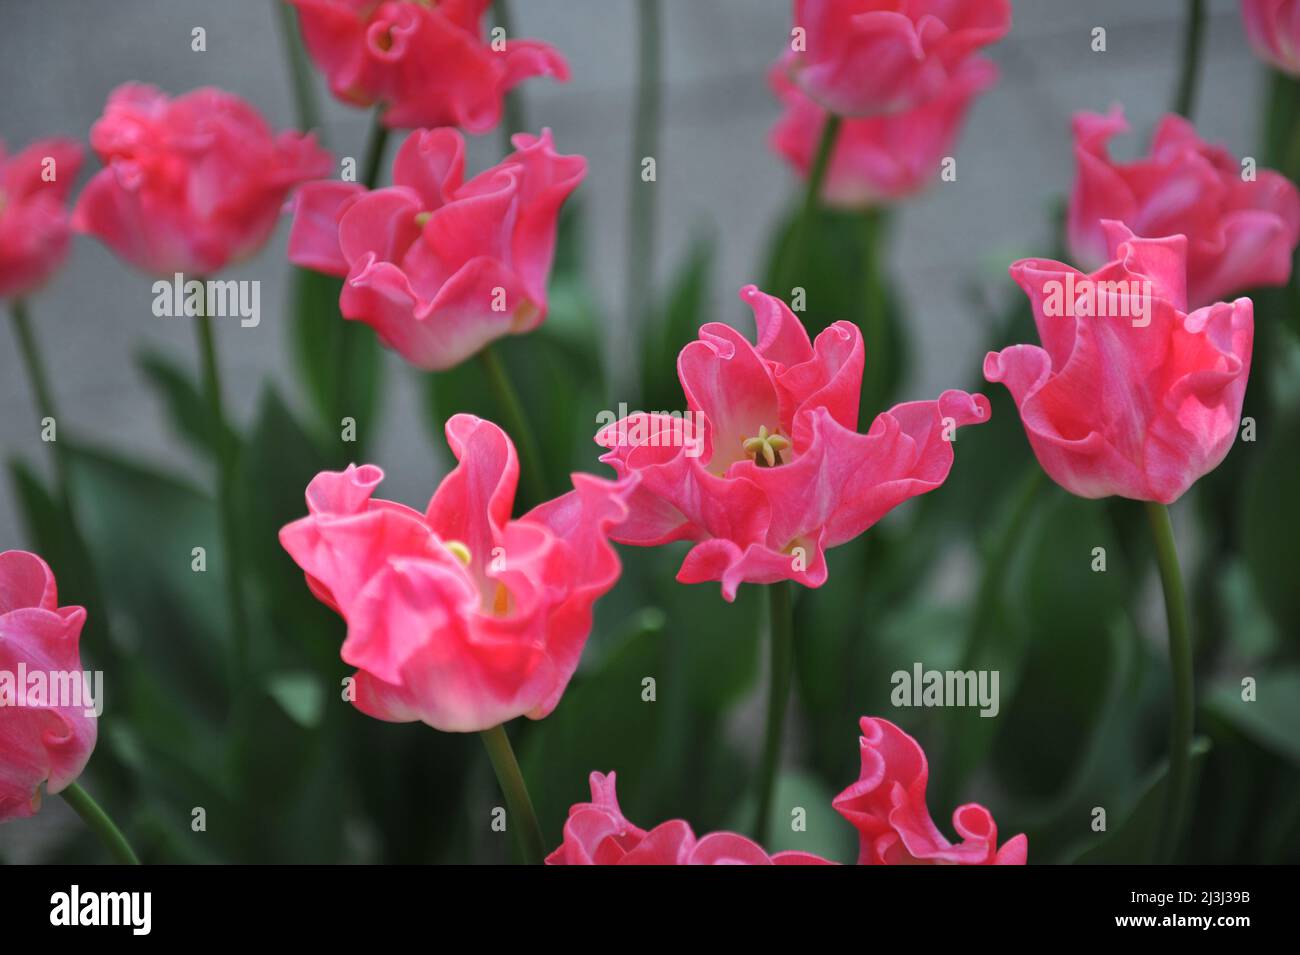 Pink Coronet tulips (Tulipa) Crown of Dynasty bloom in a garden in March Stock Photo